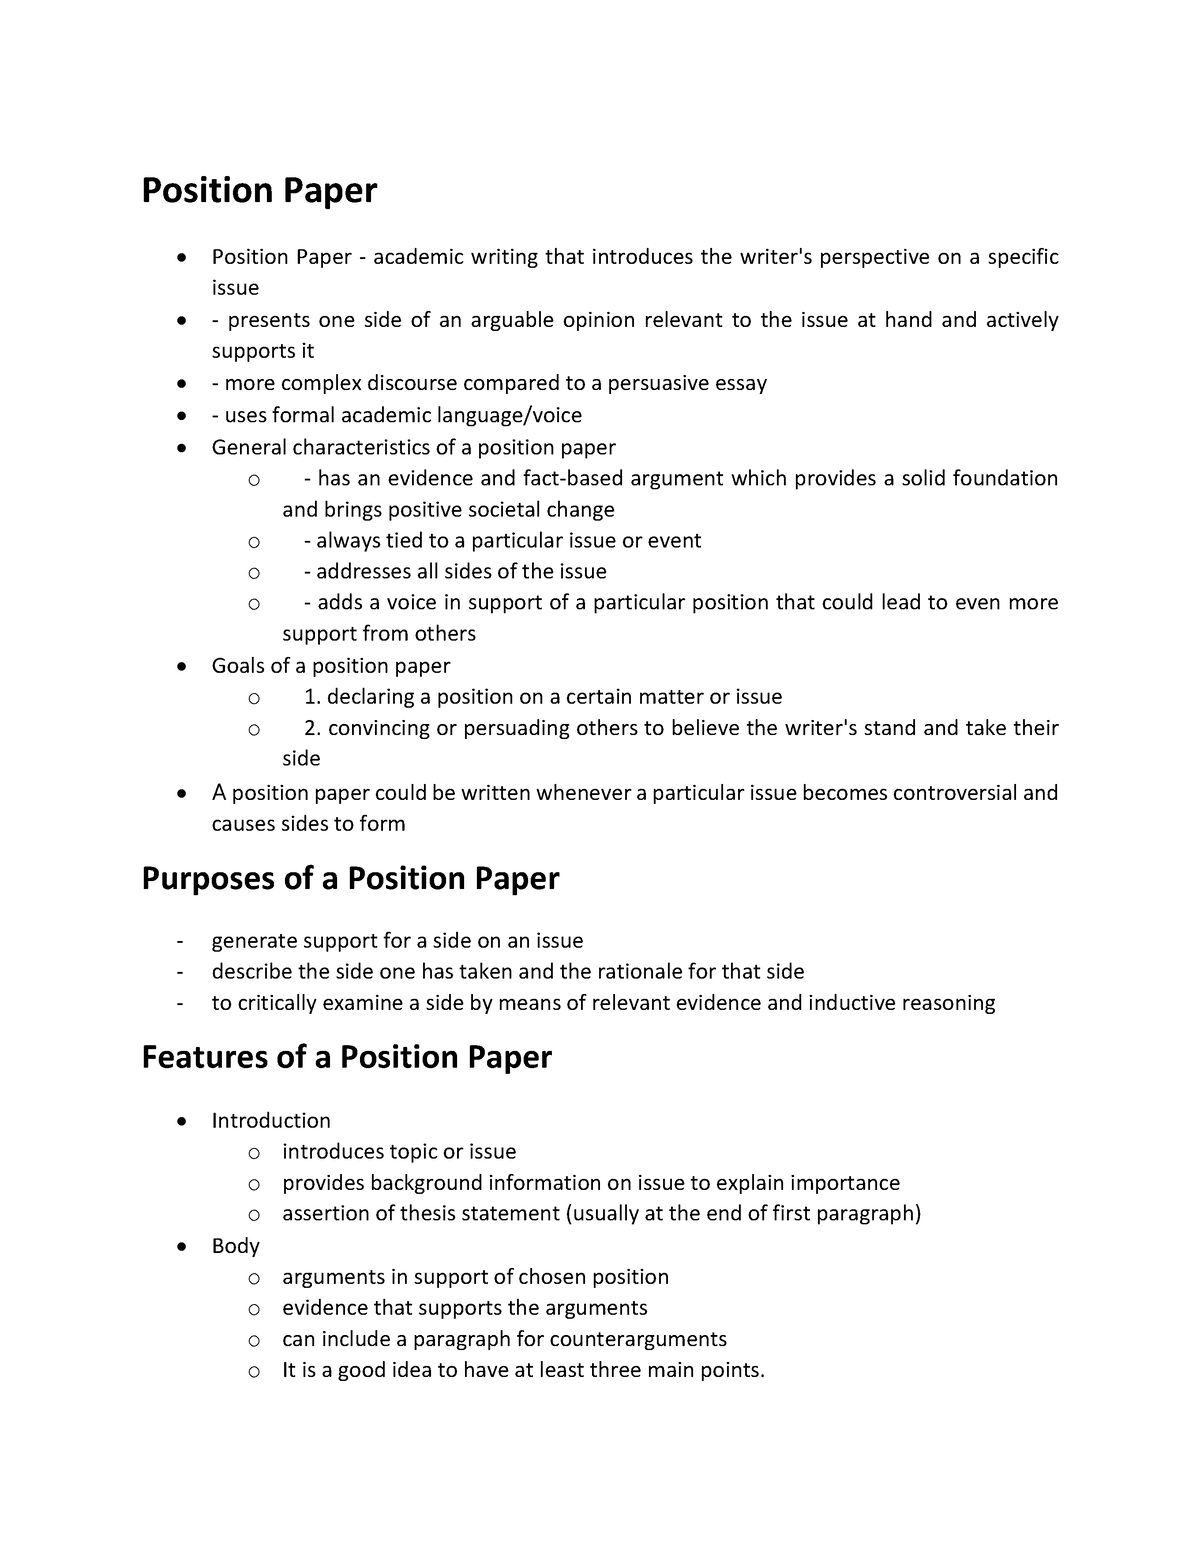 essay about position paper writing